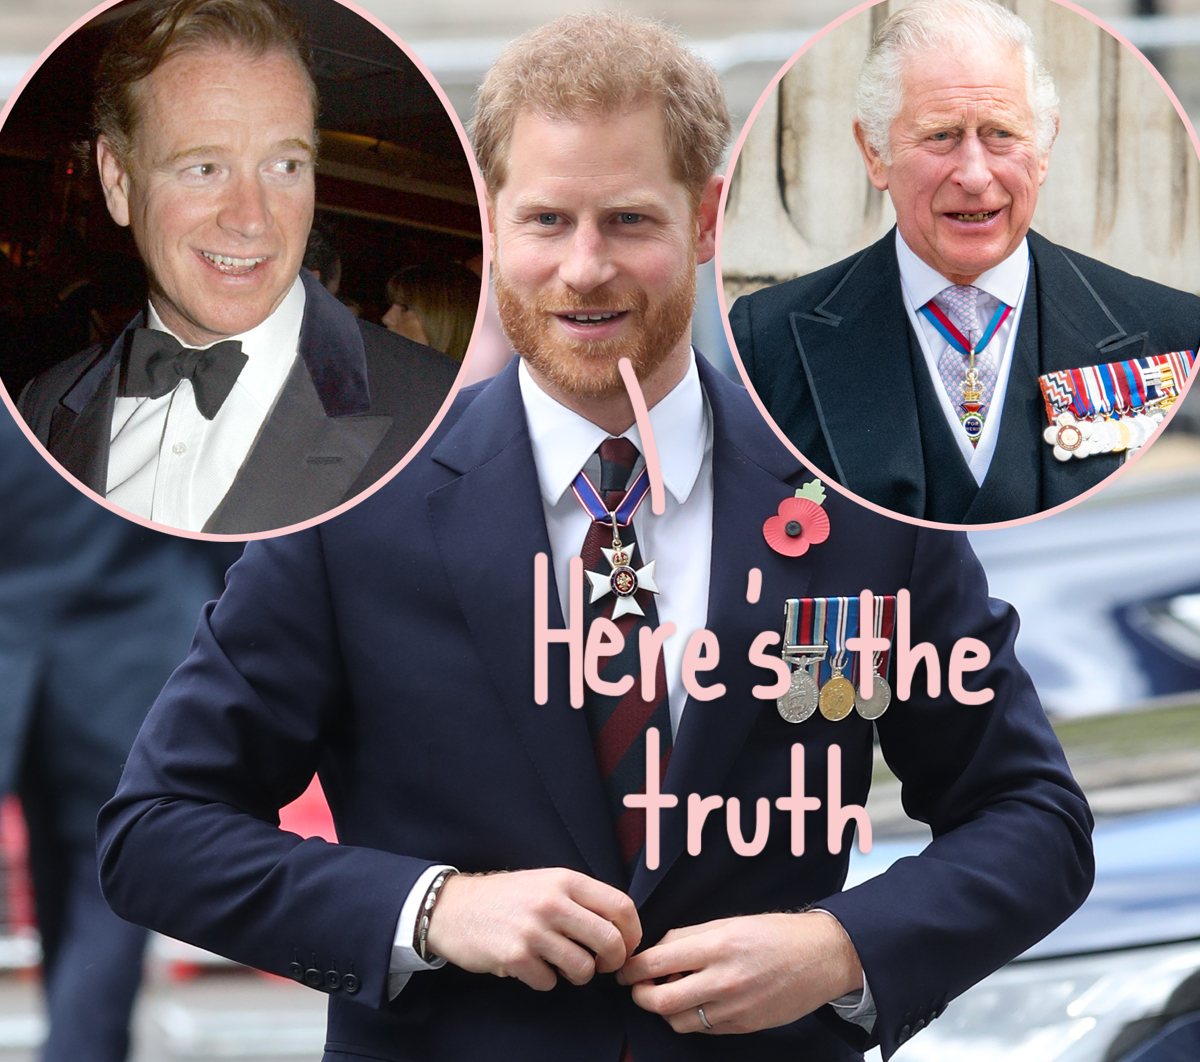 #Prince Harry Finally Responds To Rumor About His REAL Father!